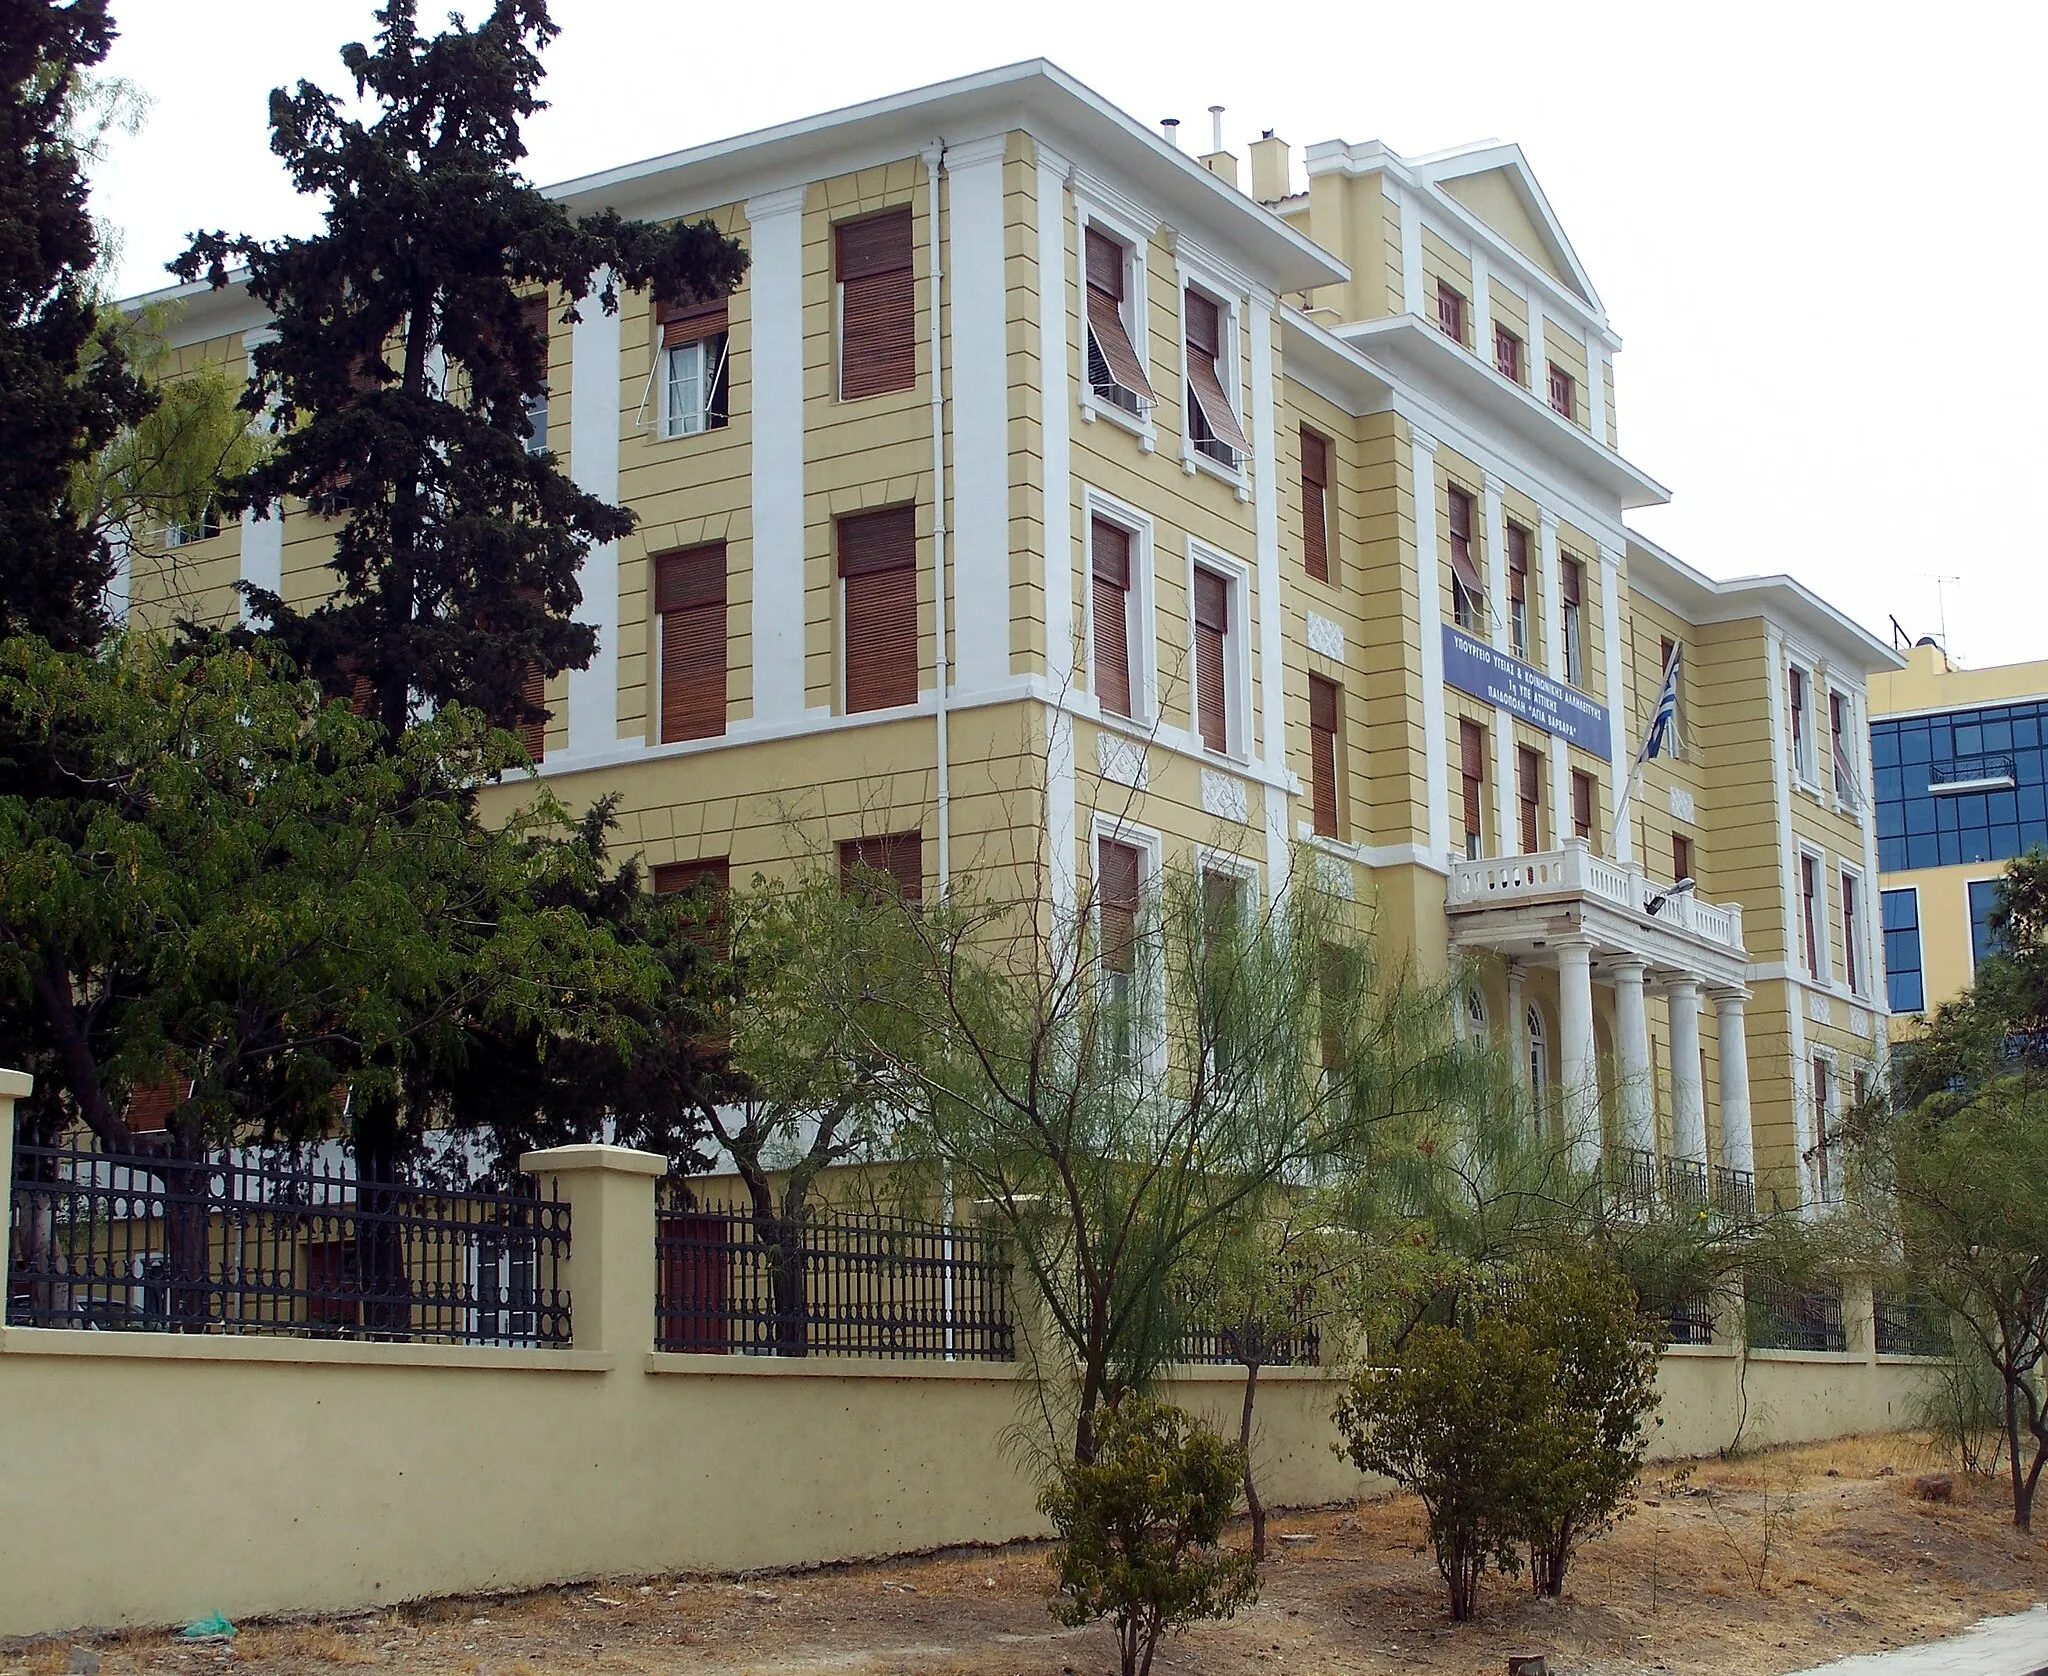 Photo showing: The Iosifogleion building, used as a child shelter since the 1930's, at Nea Smyrni in Athens.